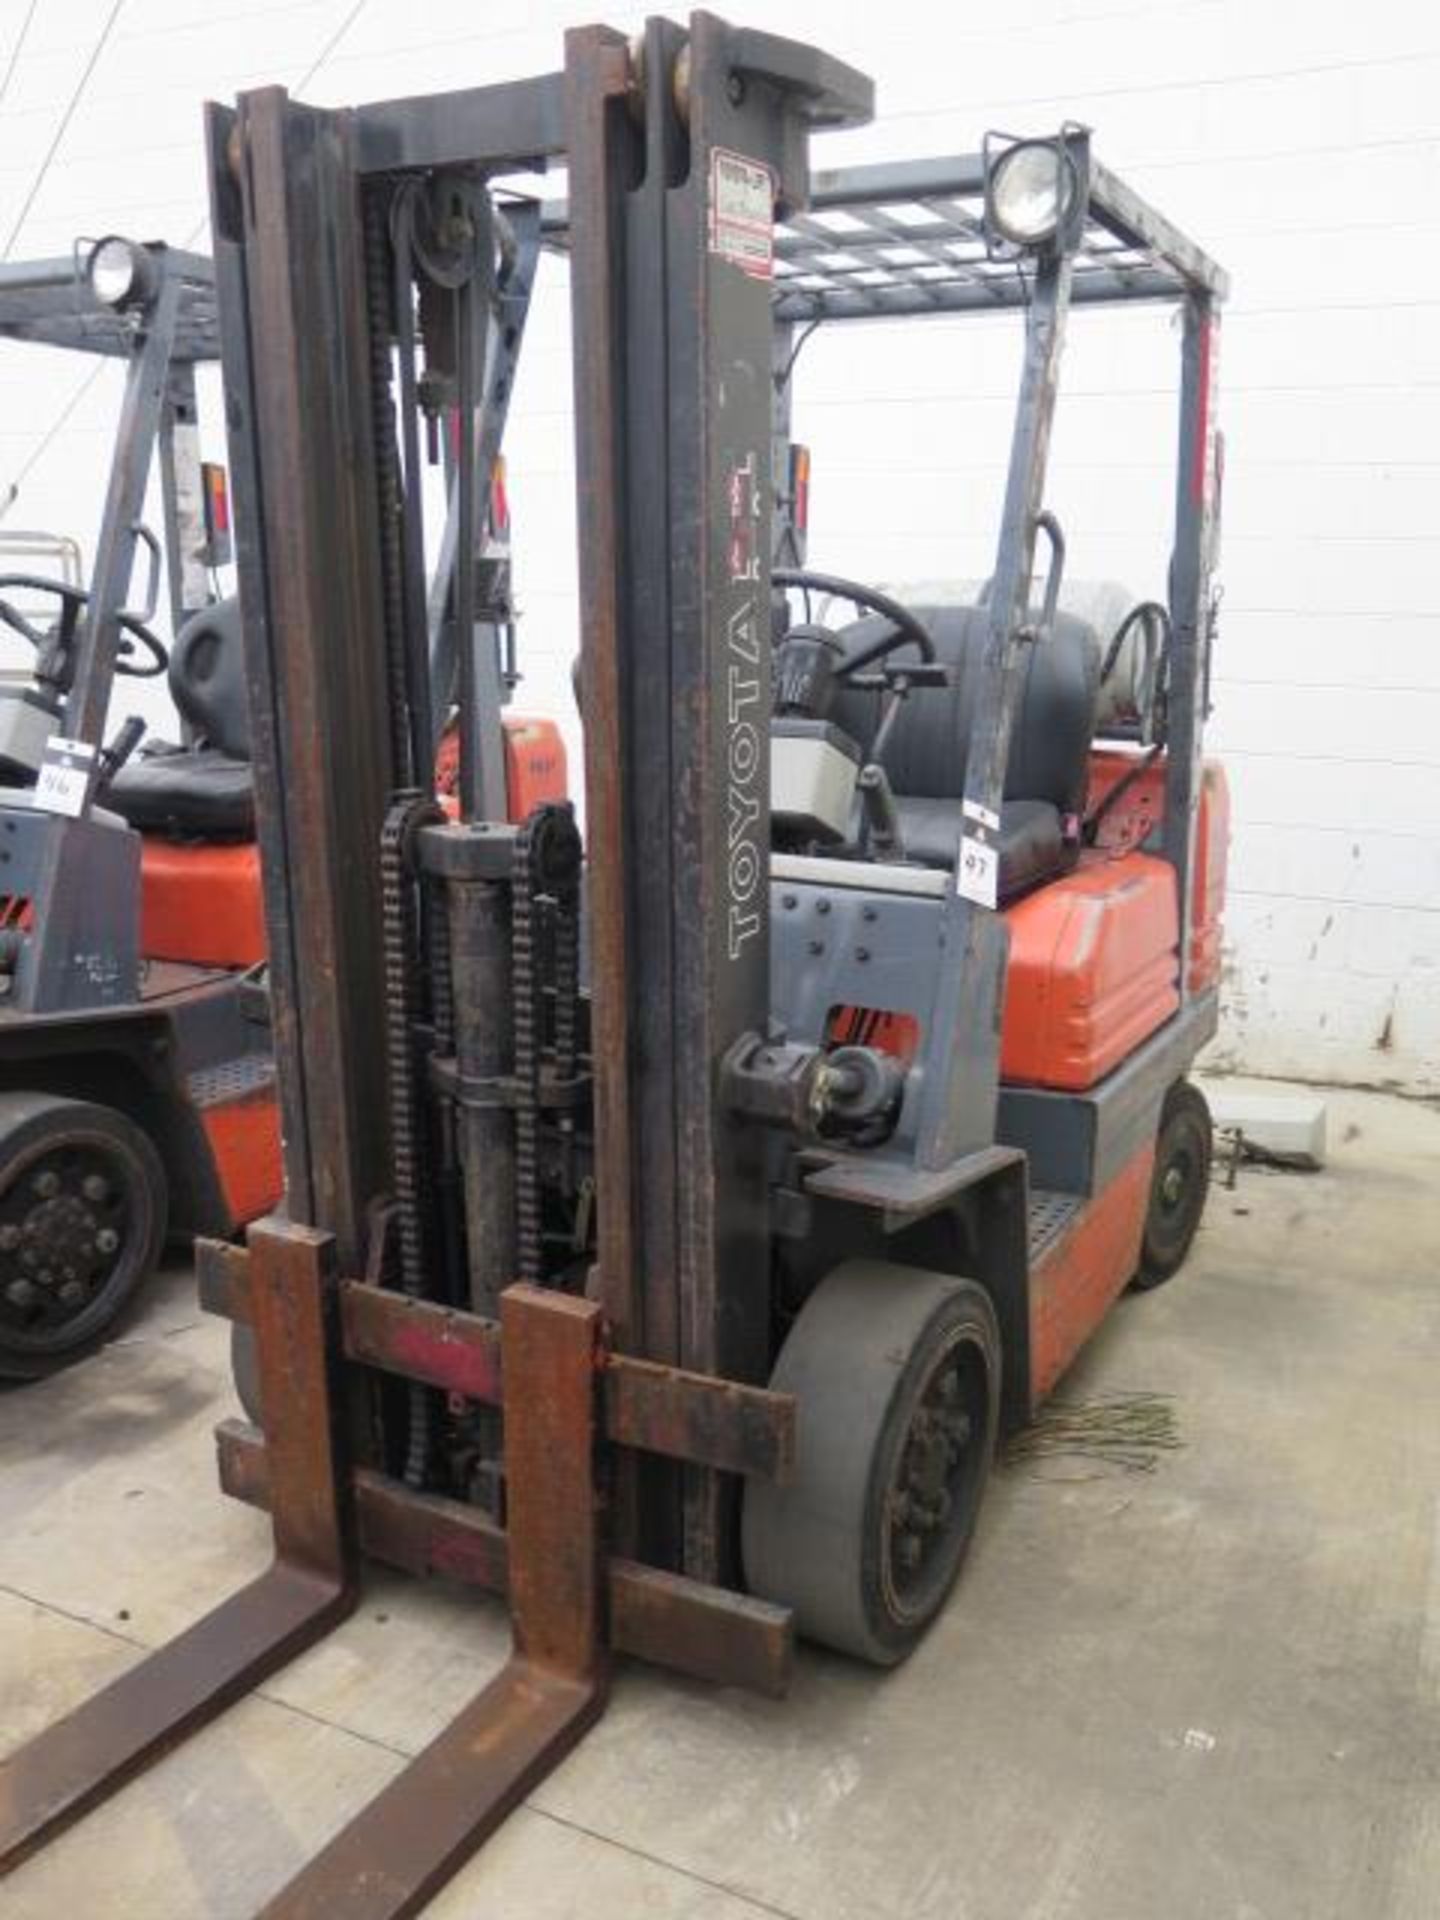 Toyota 5FGC25 5000 Lb Cap LPG Forklift s/n 5FGC25-85185 w/ 3-Stage Mast, 185" Lift Height, Cushion